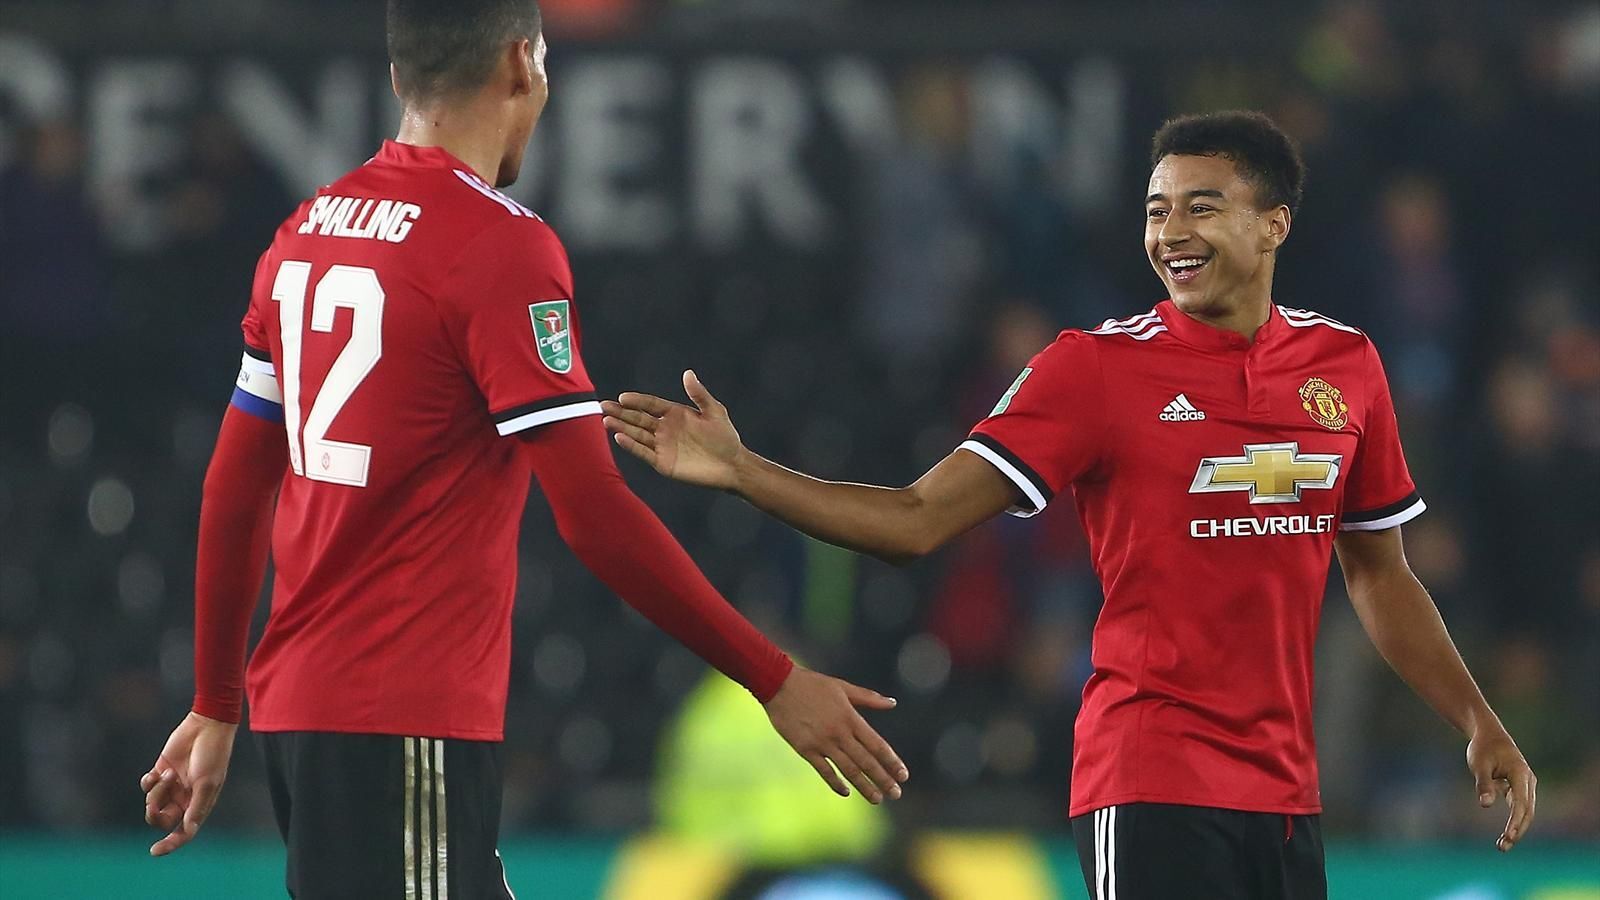 Rashford and Lingard Speak in Support of Bullied Autistic Child